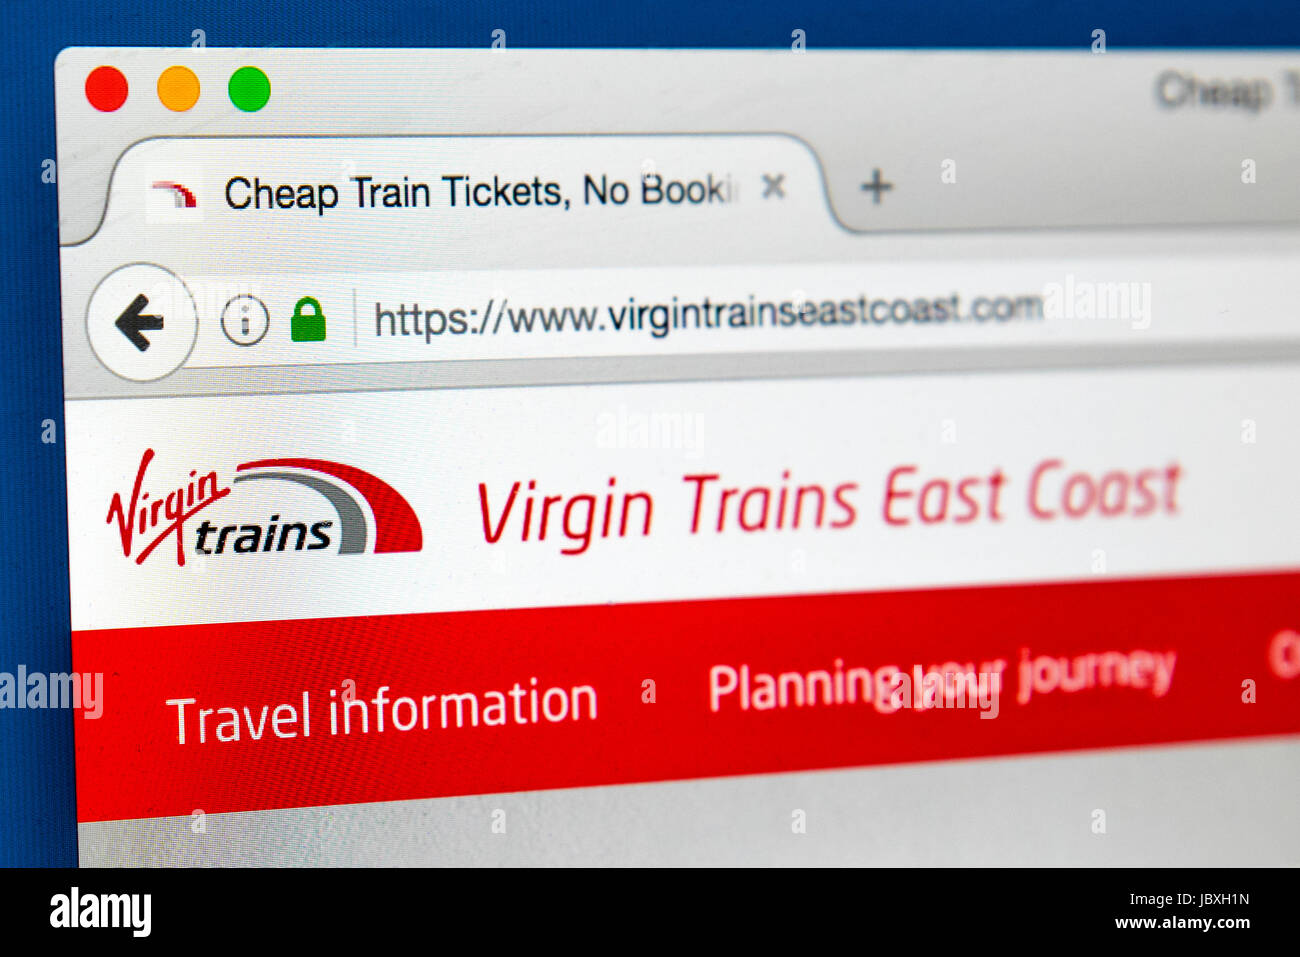 LONDON, UK - JUNE 8TH 2017: The homepage of the official website for Virgin Trains East Coast, on 8th June 2017. Stock Photo